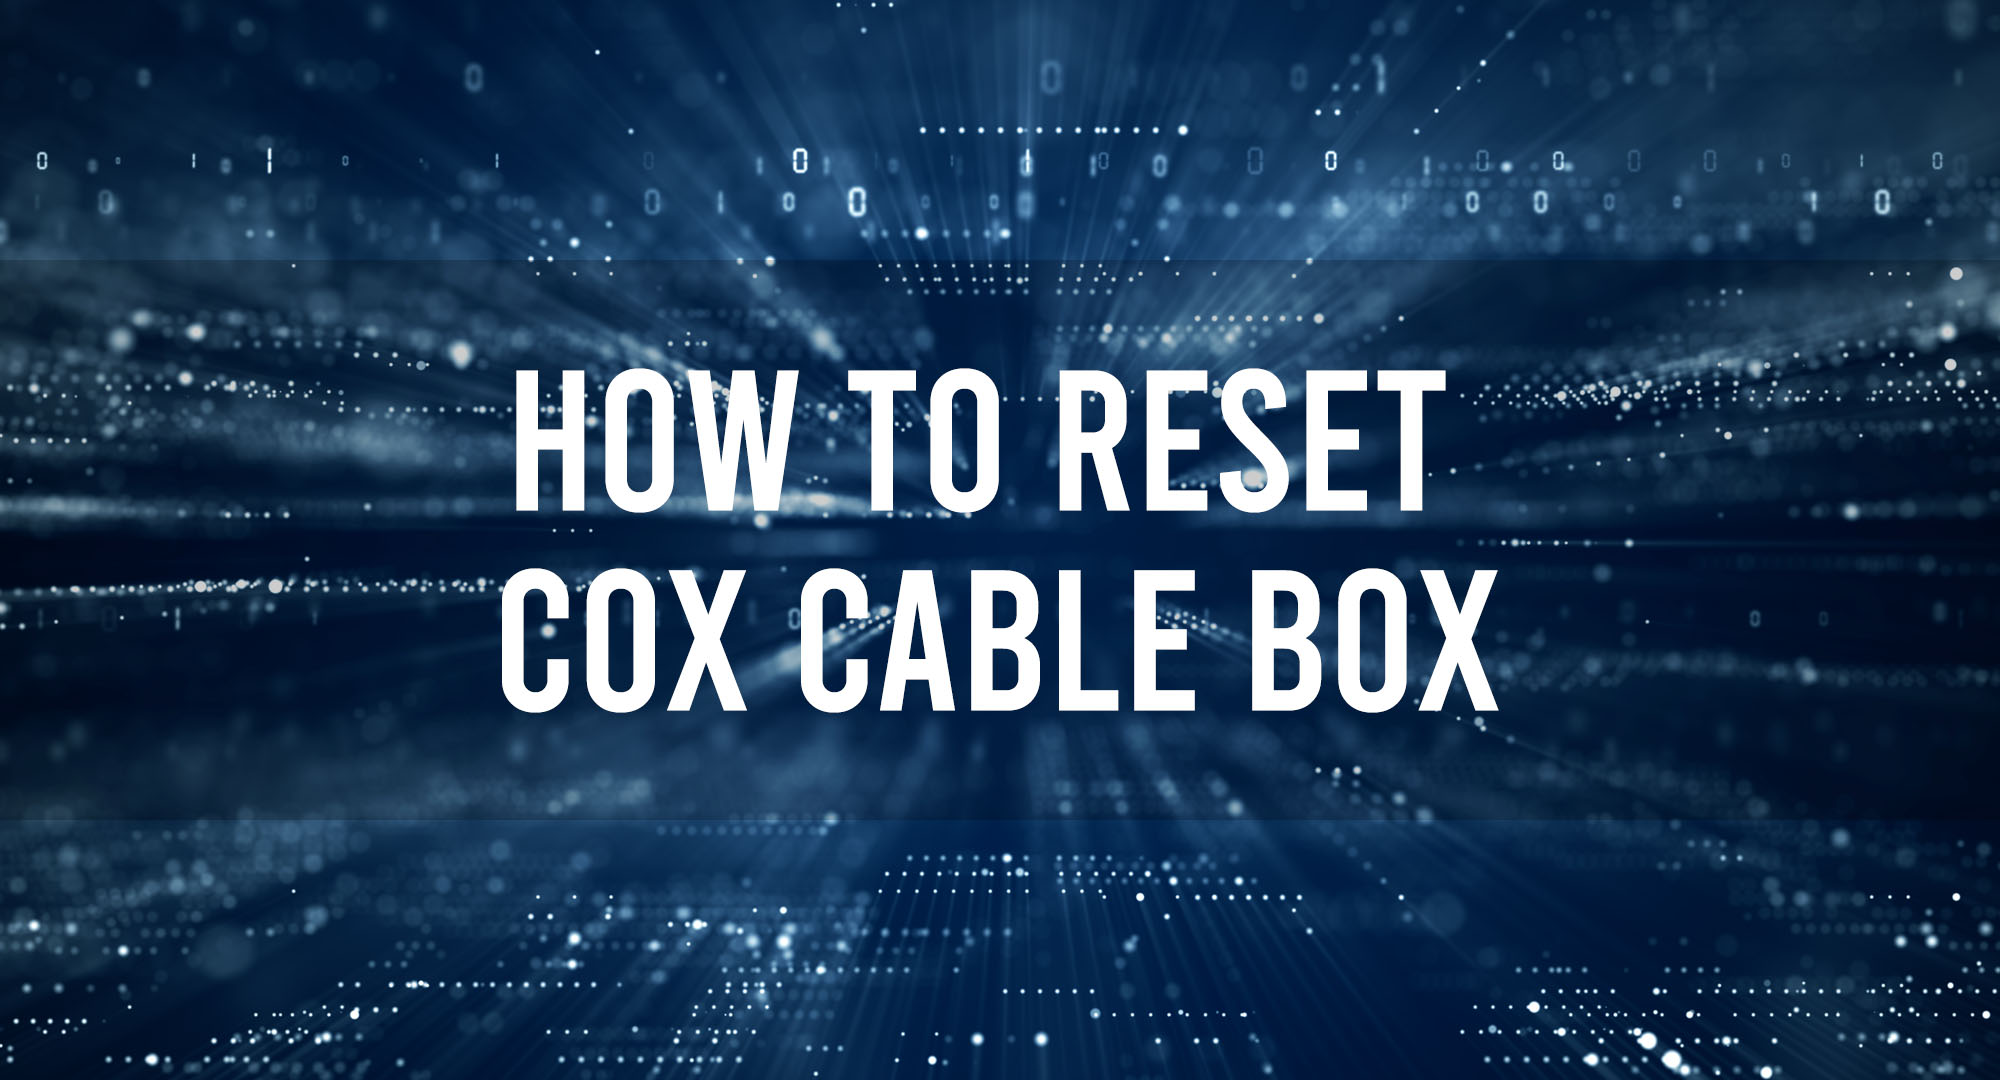 How to reset cox cable box